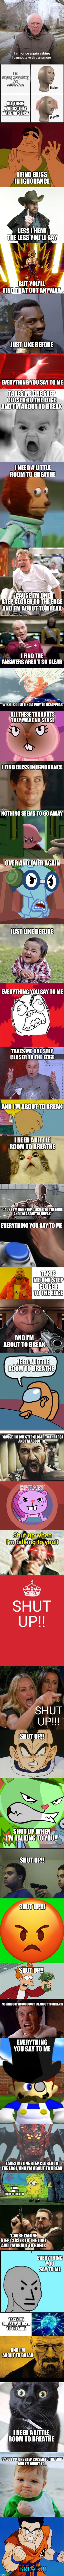 One Step Closer by Linkin Park | image tagged in memes,linkin park,gifs,imgflip sings,bernie i am once again asking for your support,drake hotline bling | made w/ Imgflip meme maker